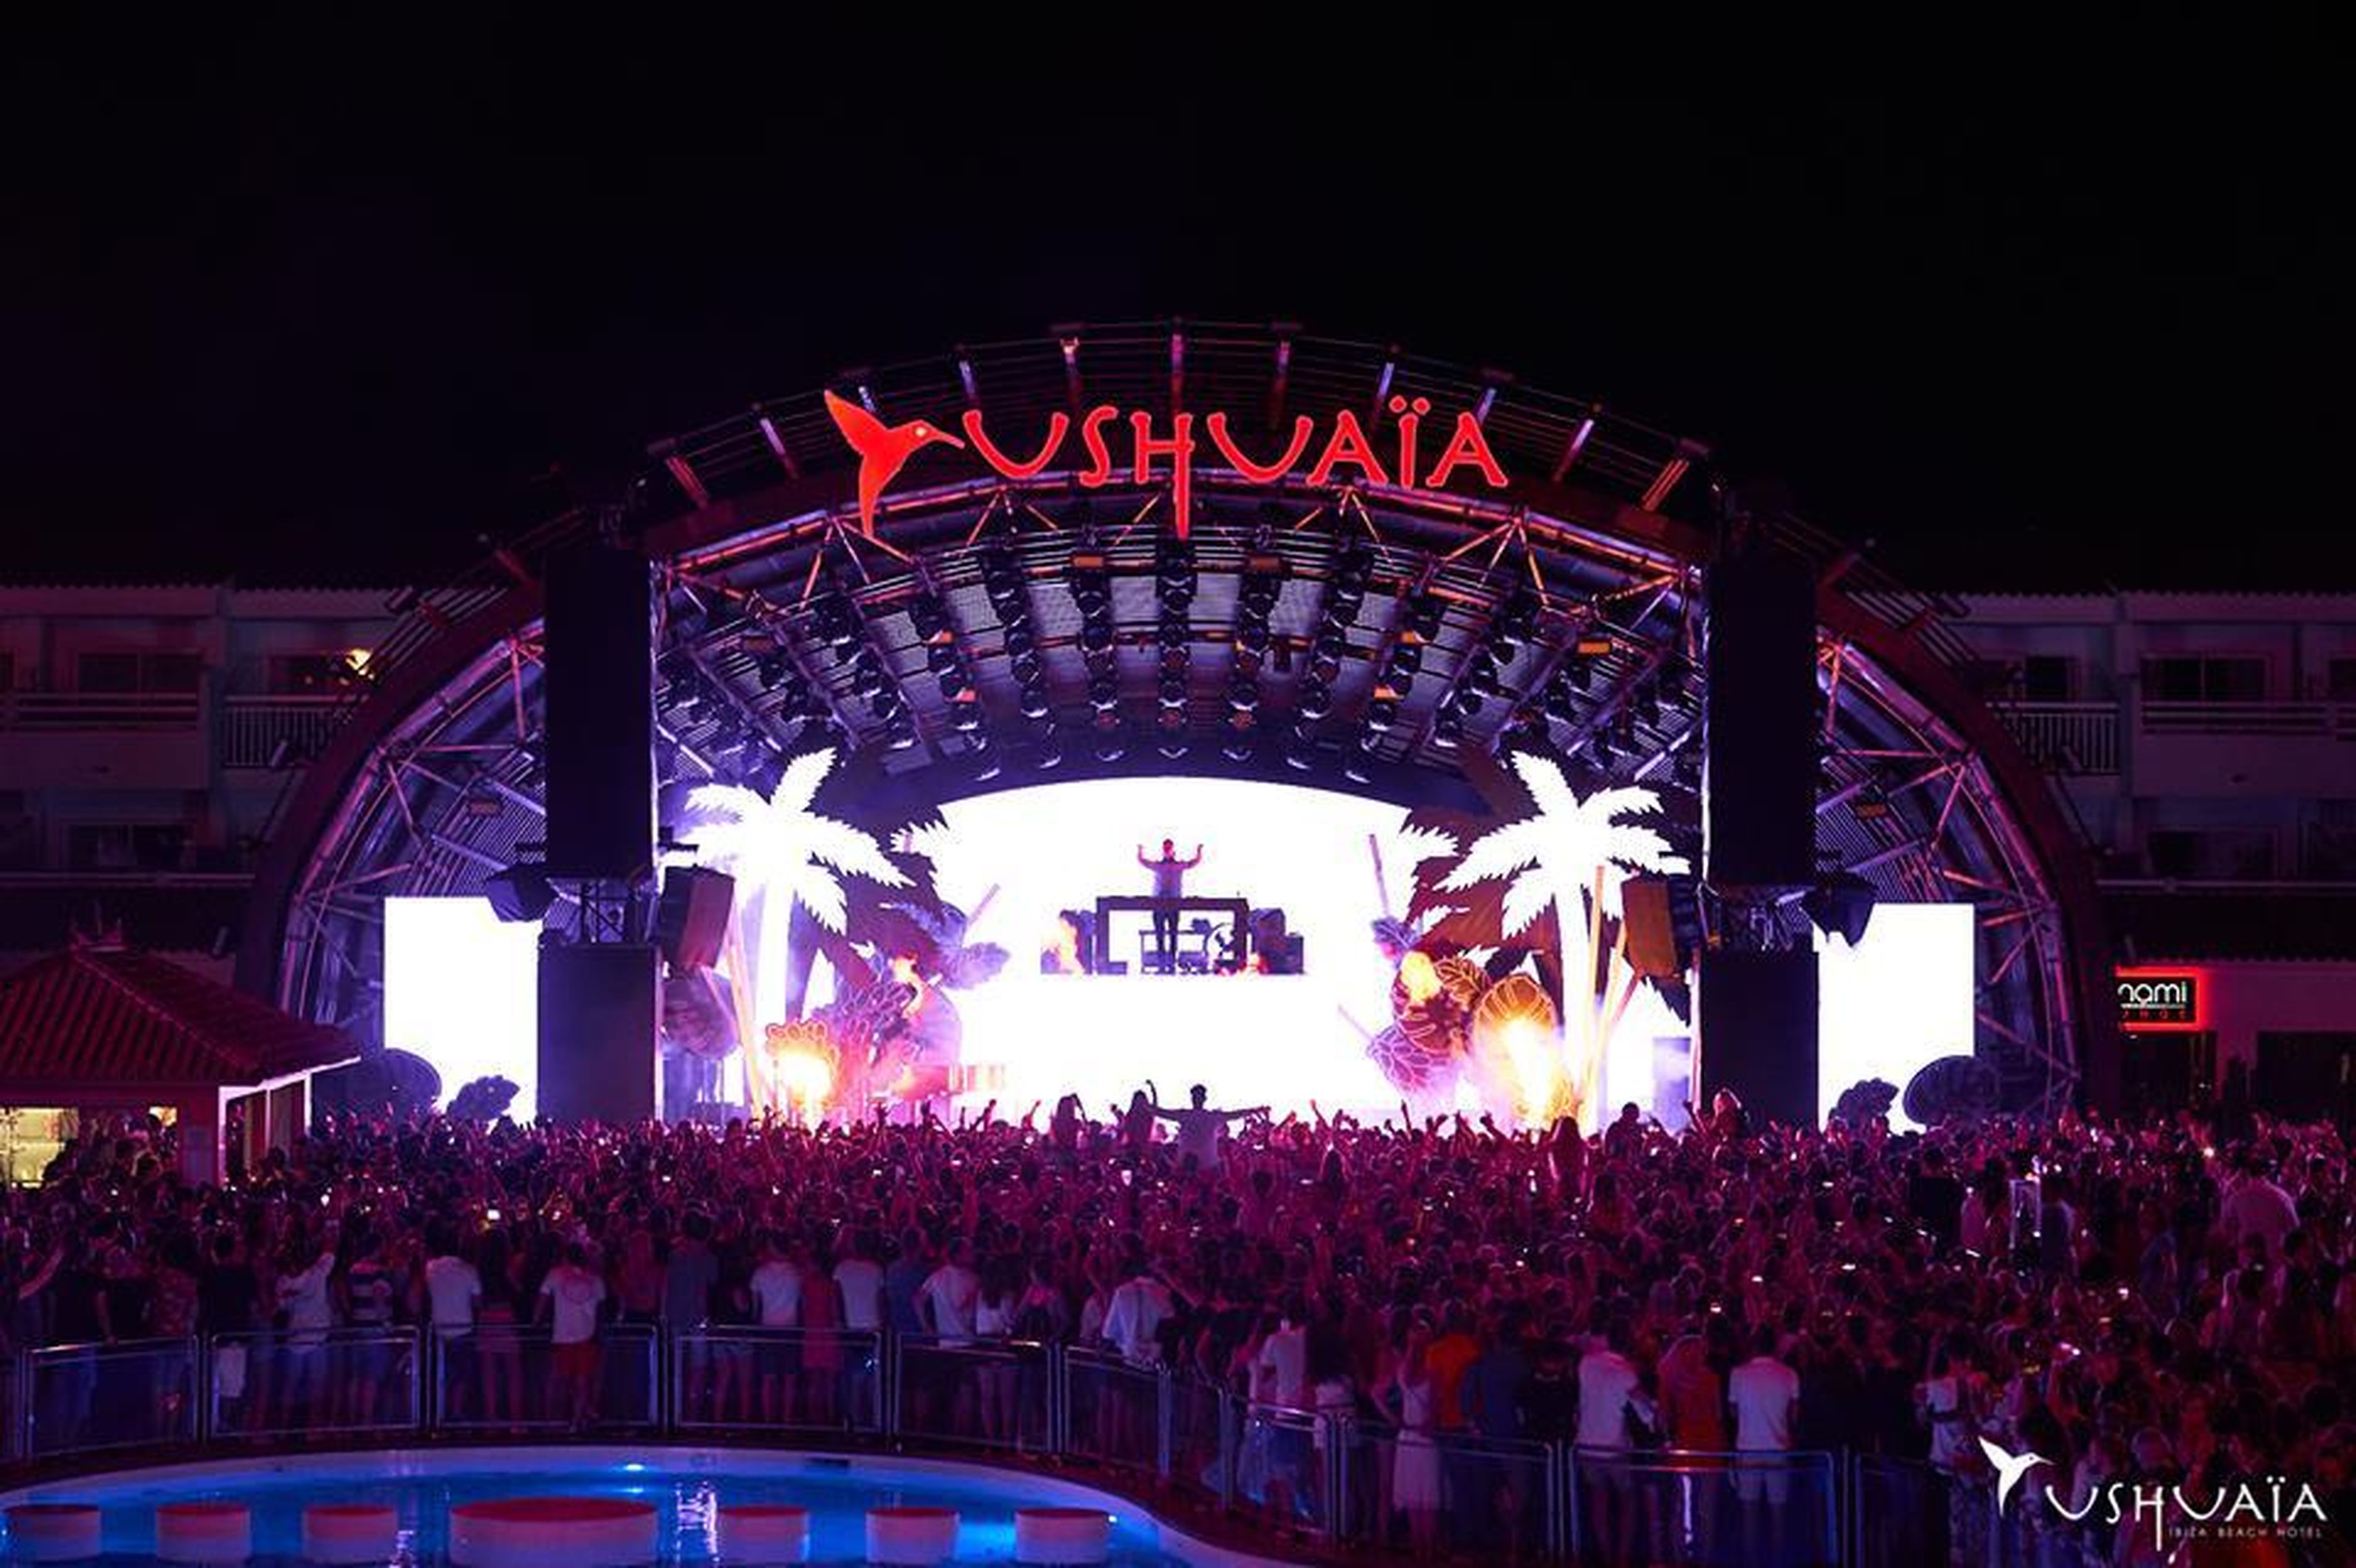 Ticket prices aren't cheap. When I went to see Norwegian star DJ Kygo at open-air superclub Ushuaia, I paid $60 a piece and a beer runs $14 or more. But, in truth, it's more of a concert venue with top-of-the-line production value